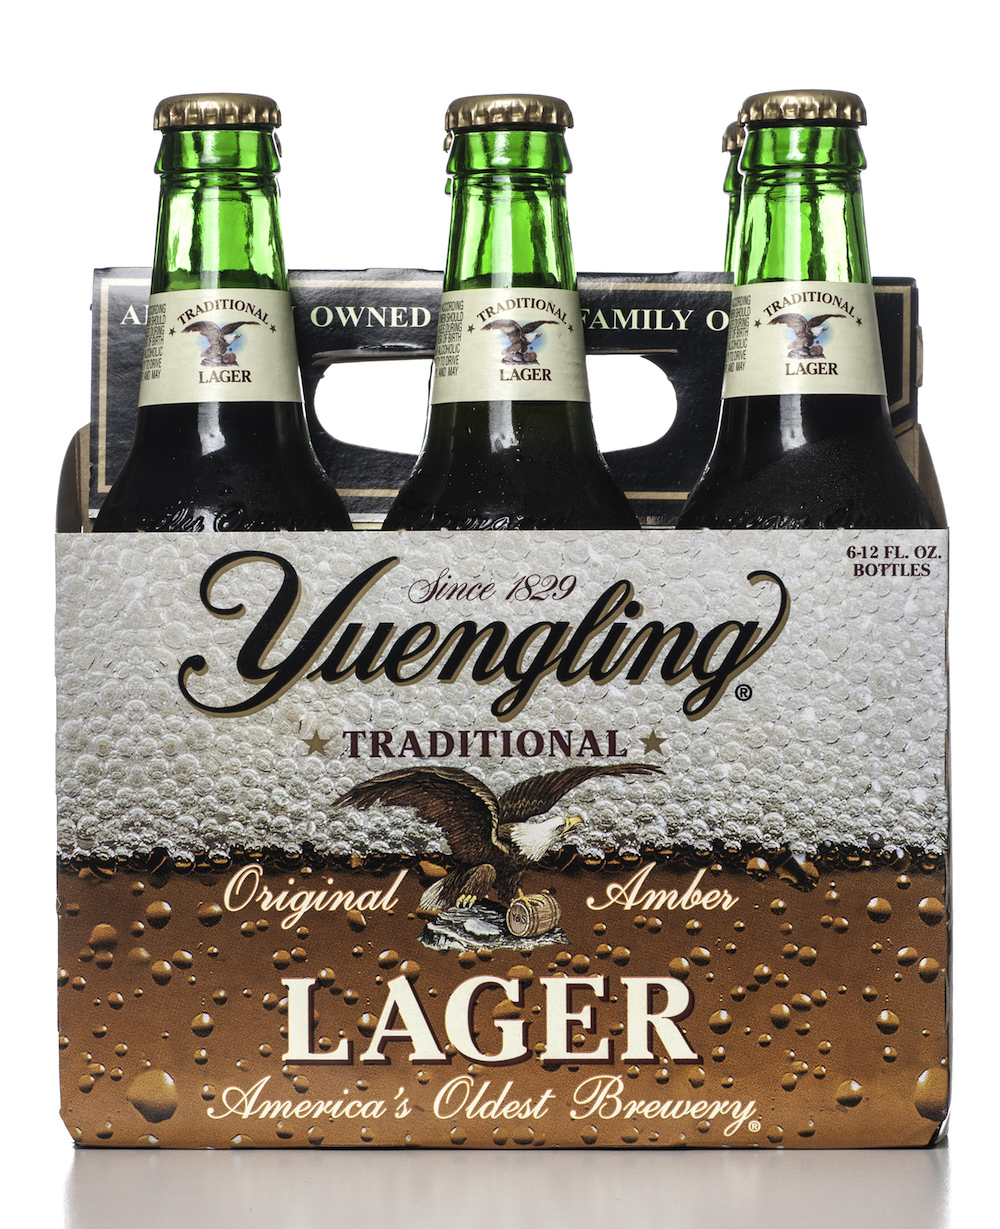 Yuengling Traditional Lager beer